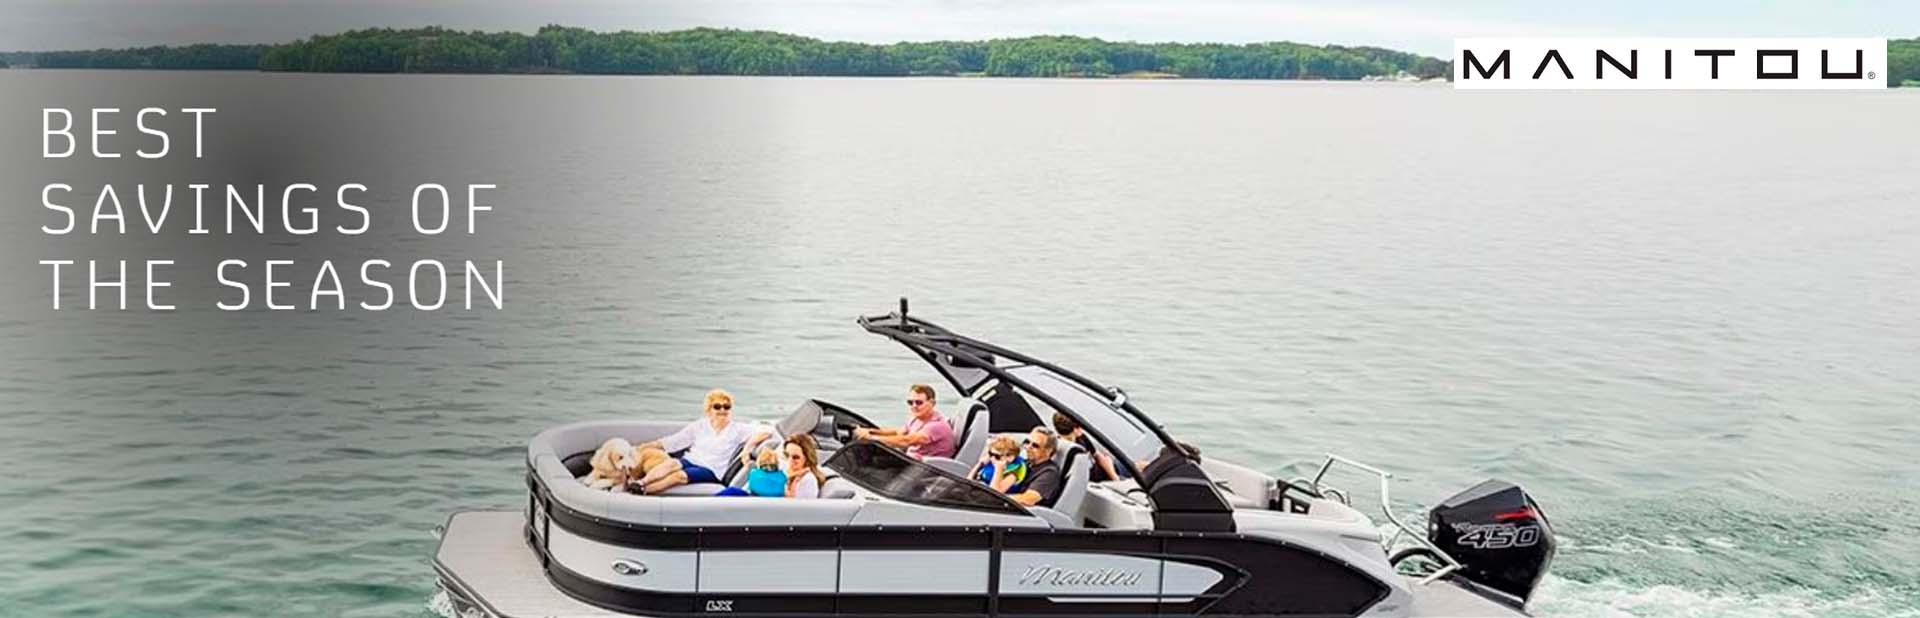 MANITOU PONTOONS!  SAVE UP TO $10,000 ON SELECT MODELS. †